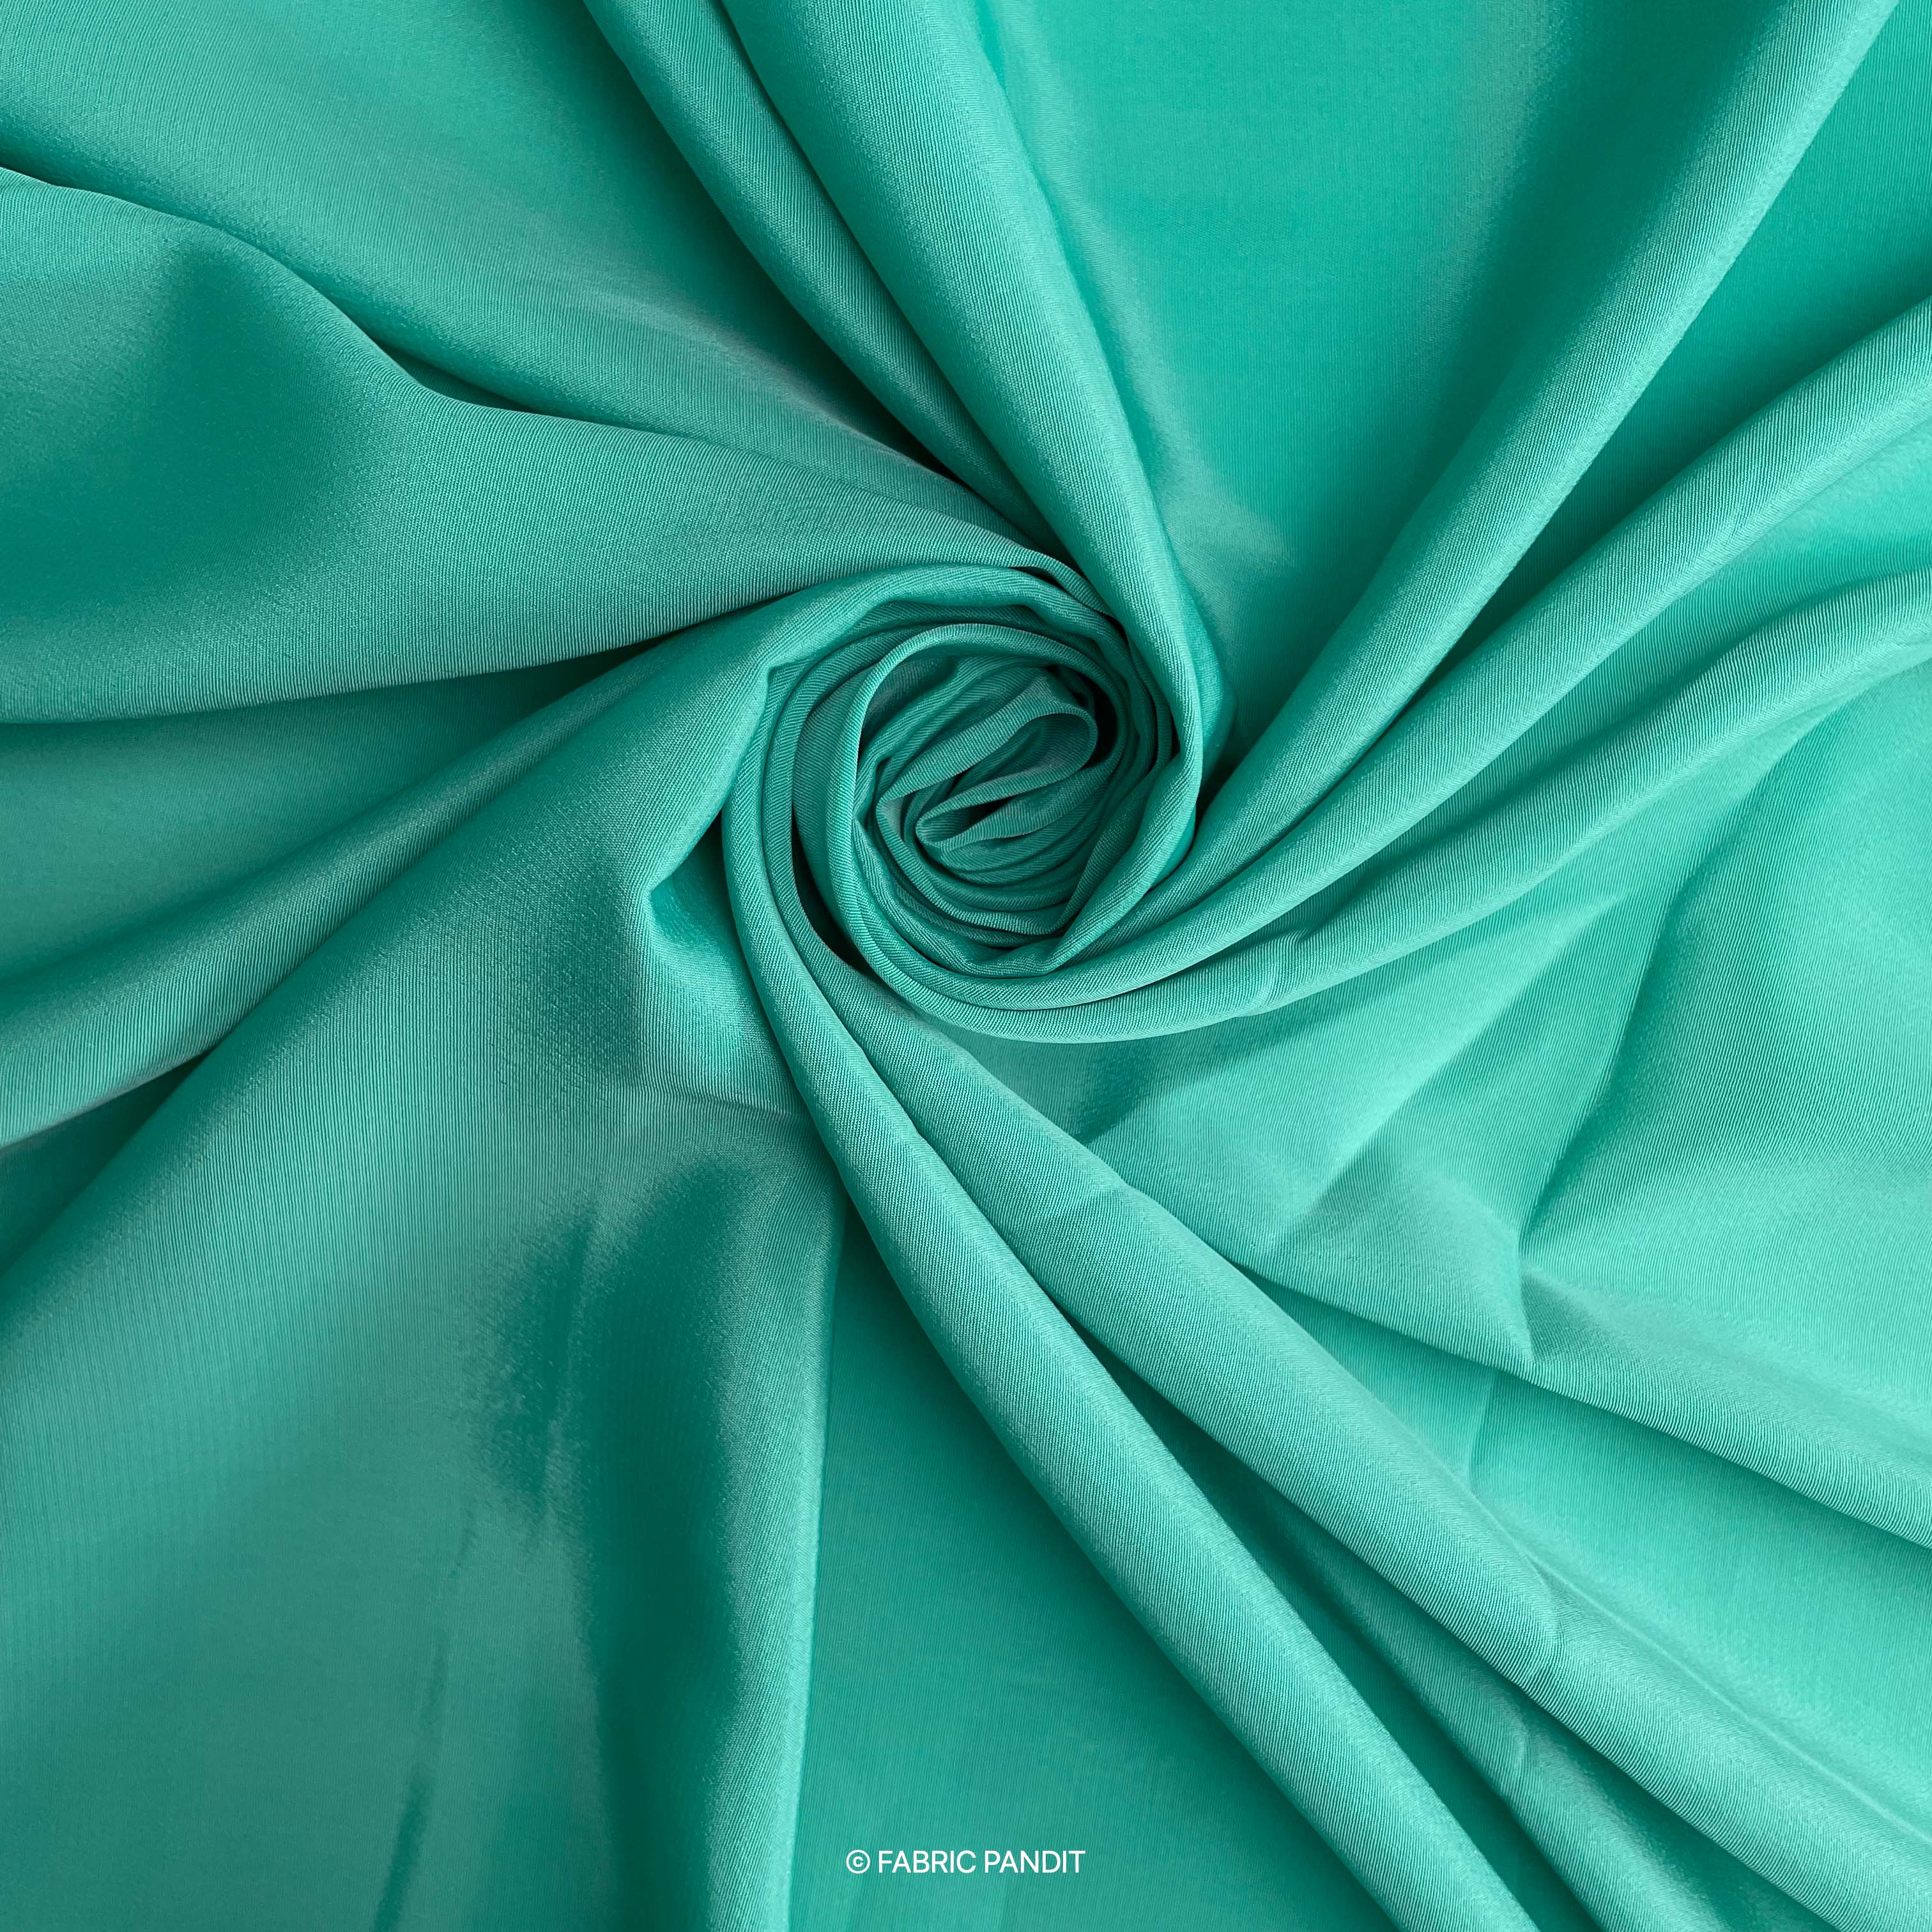 CUT PIECE) Sea Green Color Premium French Crepe Fabric (Width 44 inch –  Fabric Pandit